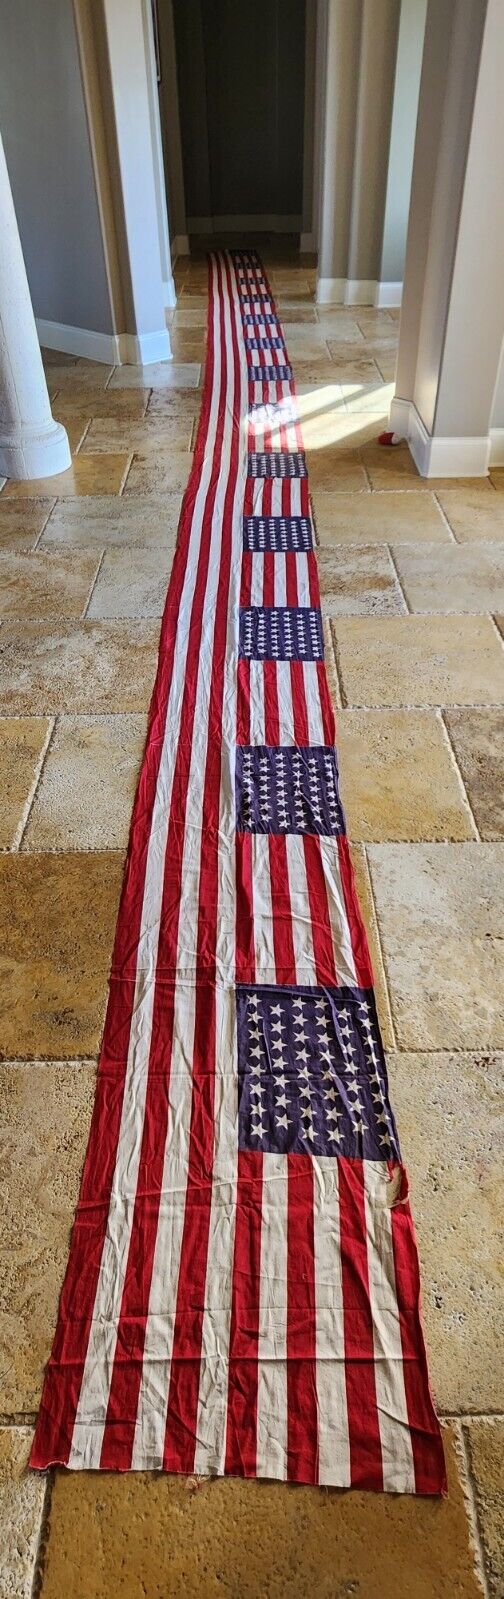 Antique 46 Star American Flag UNCUT roll of fabric 13 flags total 37 FEET LONG